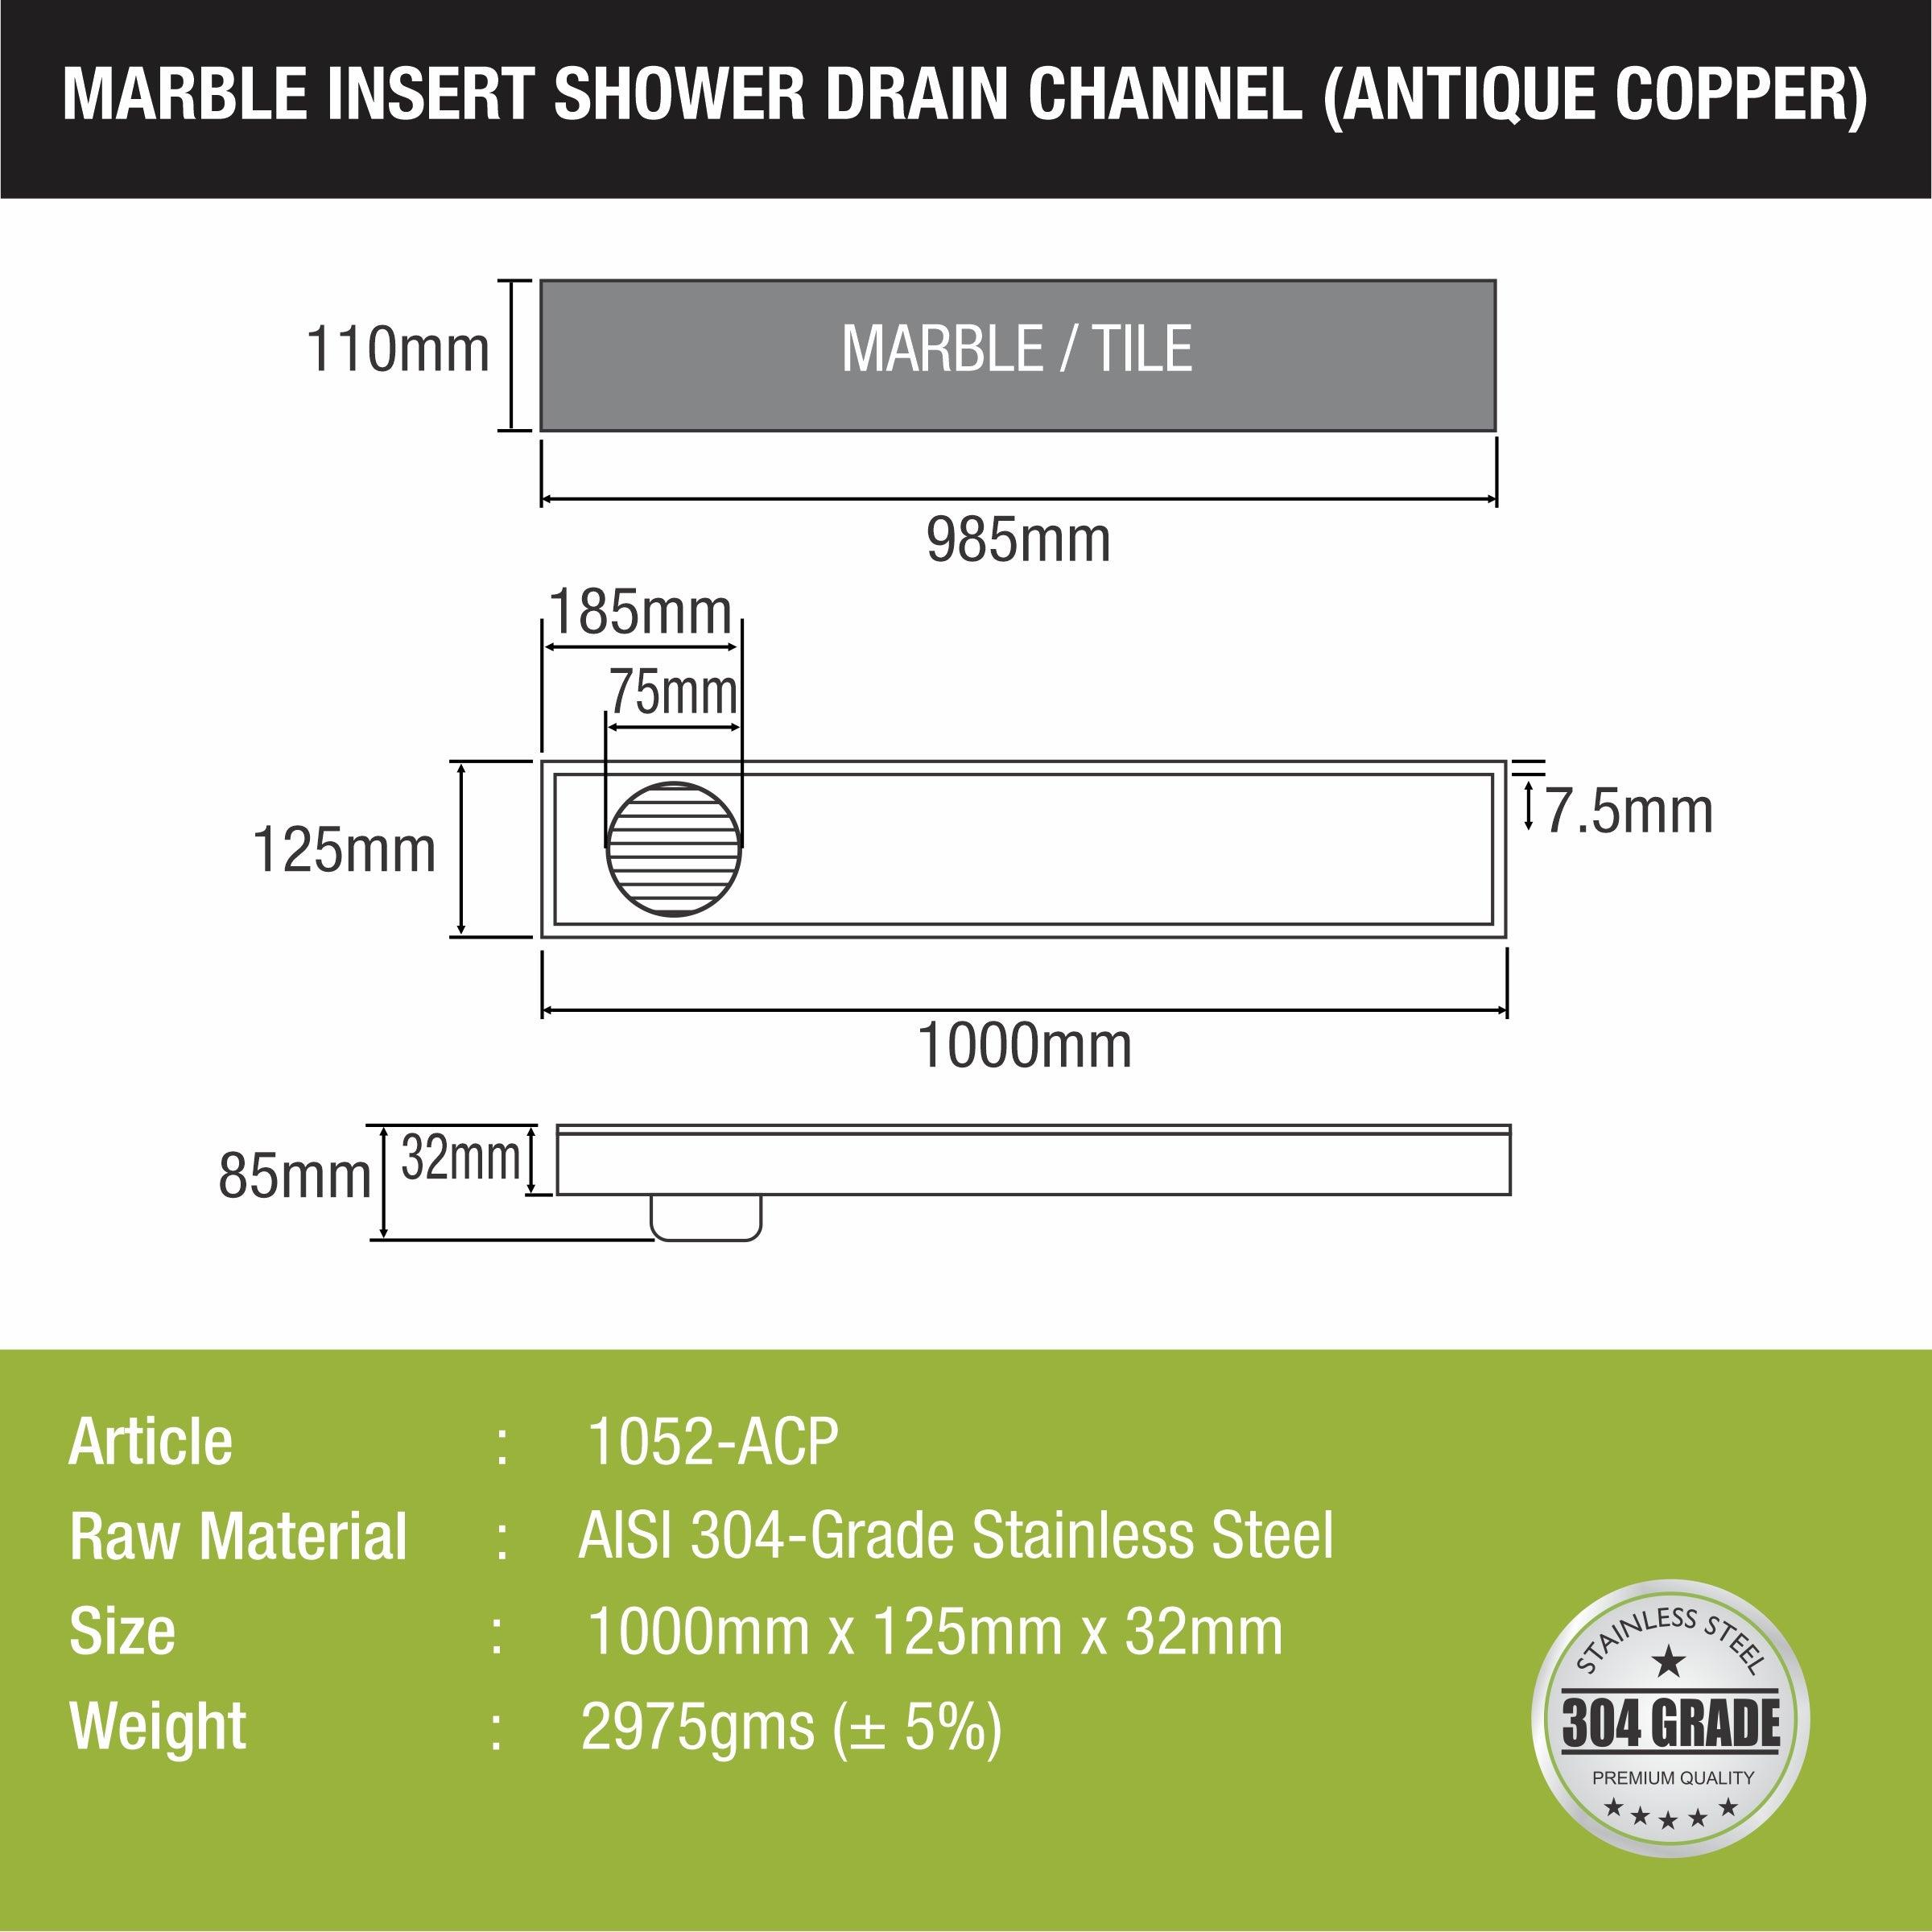 Marble Insert Shower Drain Channel - Antique Copper (40 x 5 Inches) sizes and dimensions